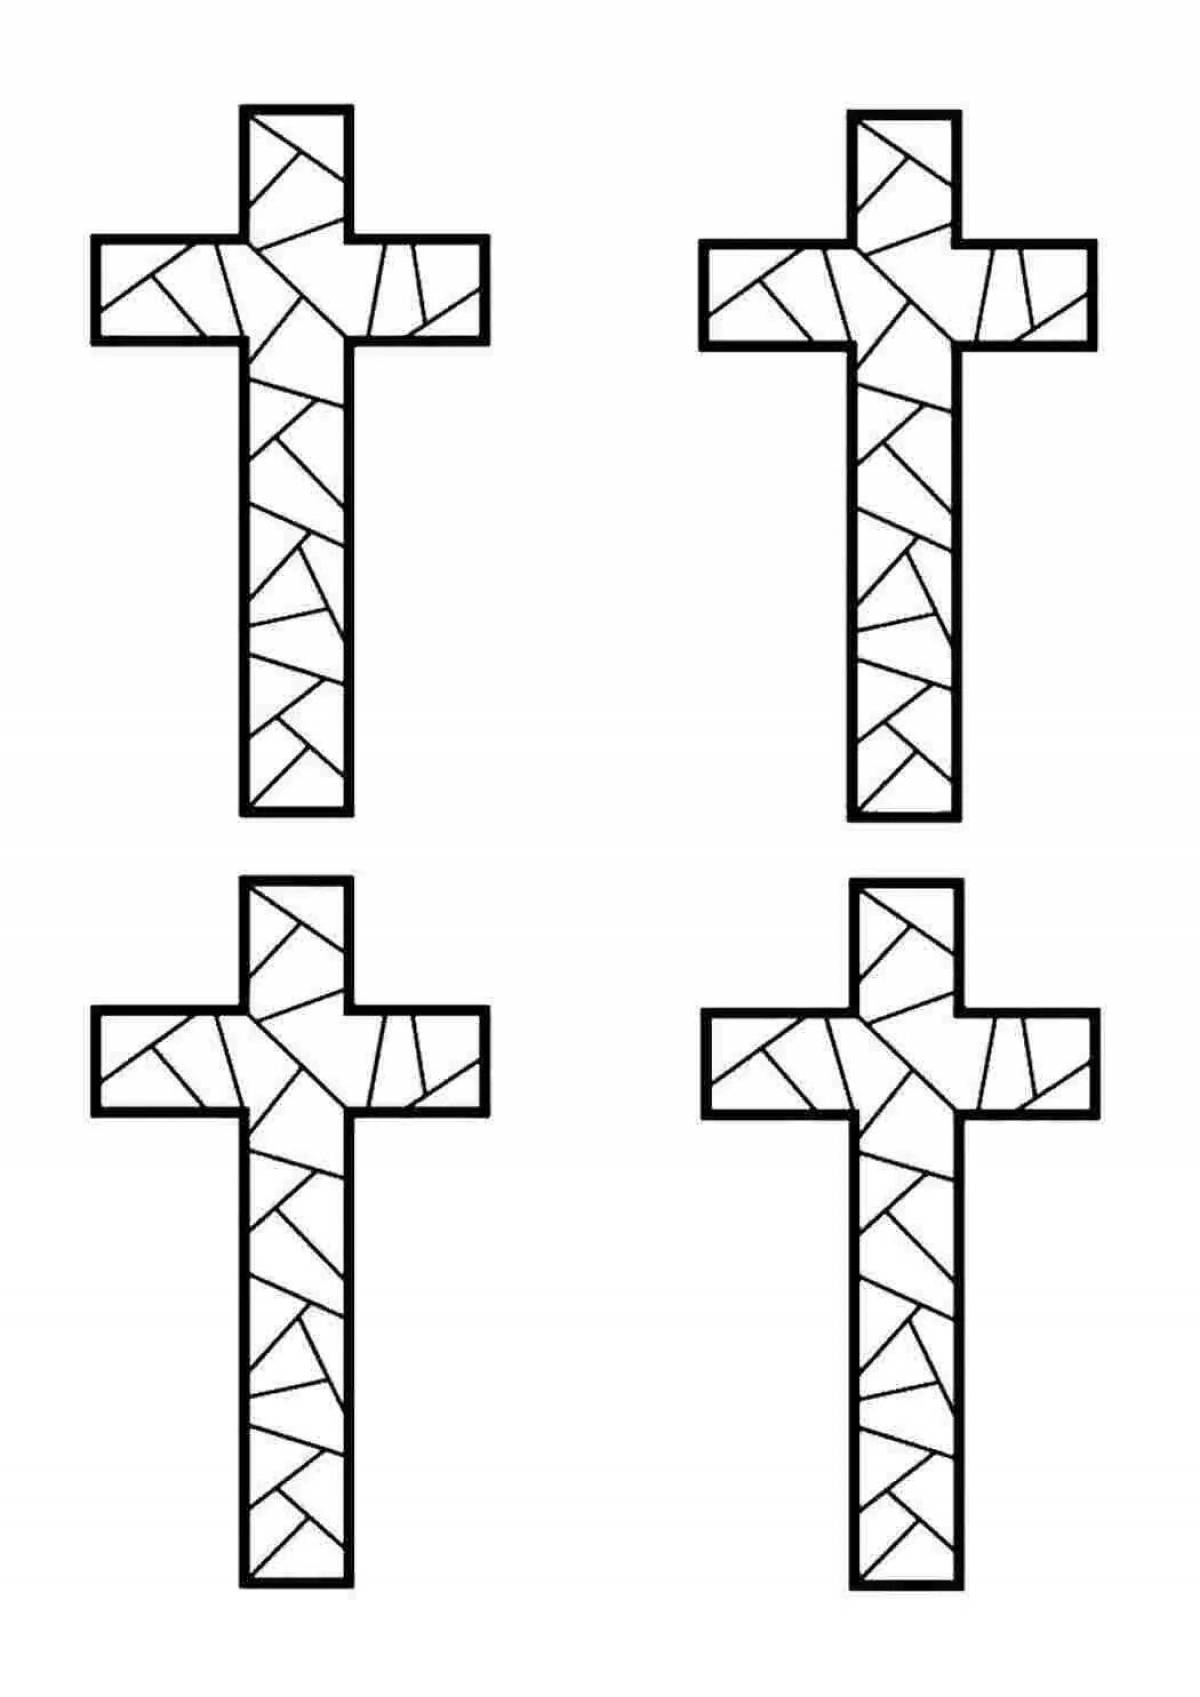 Coloring book dazzling cross for children